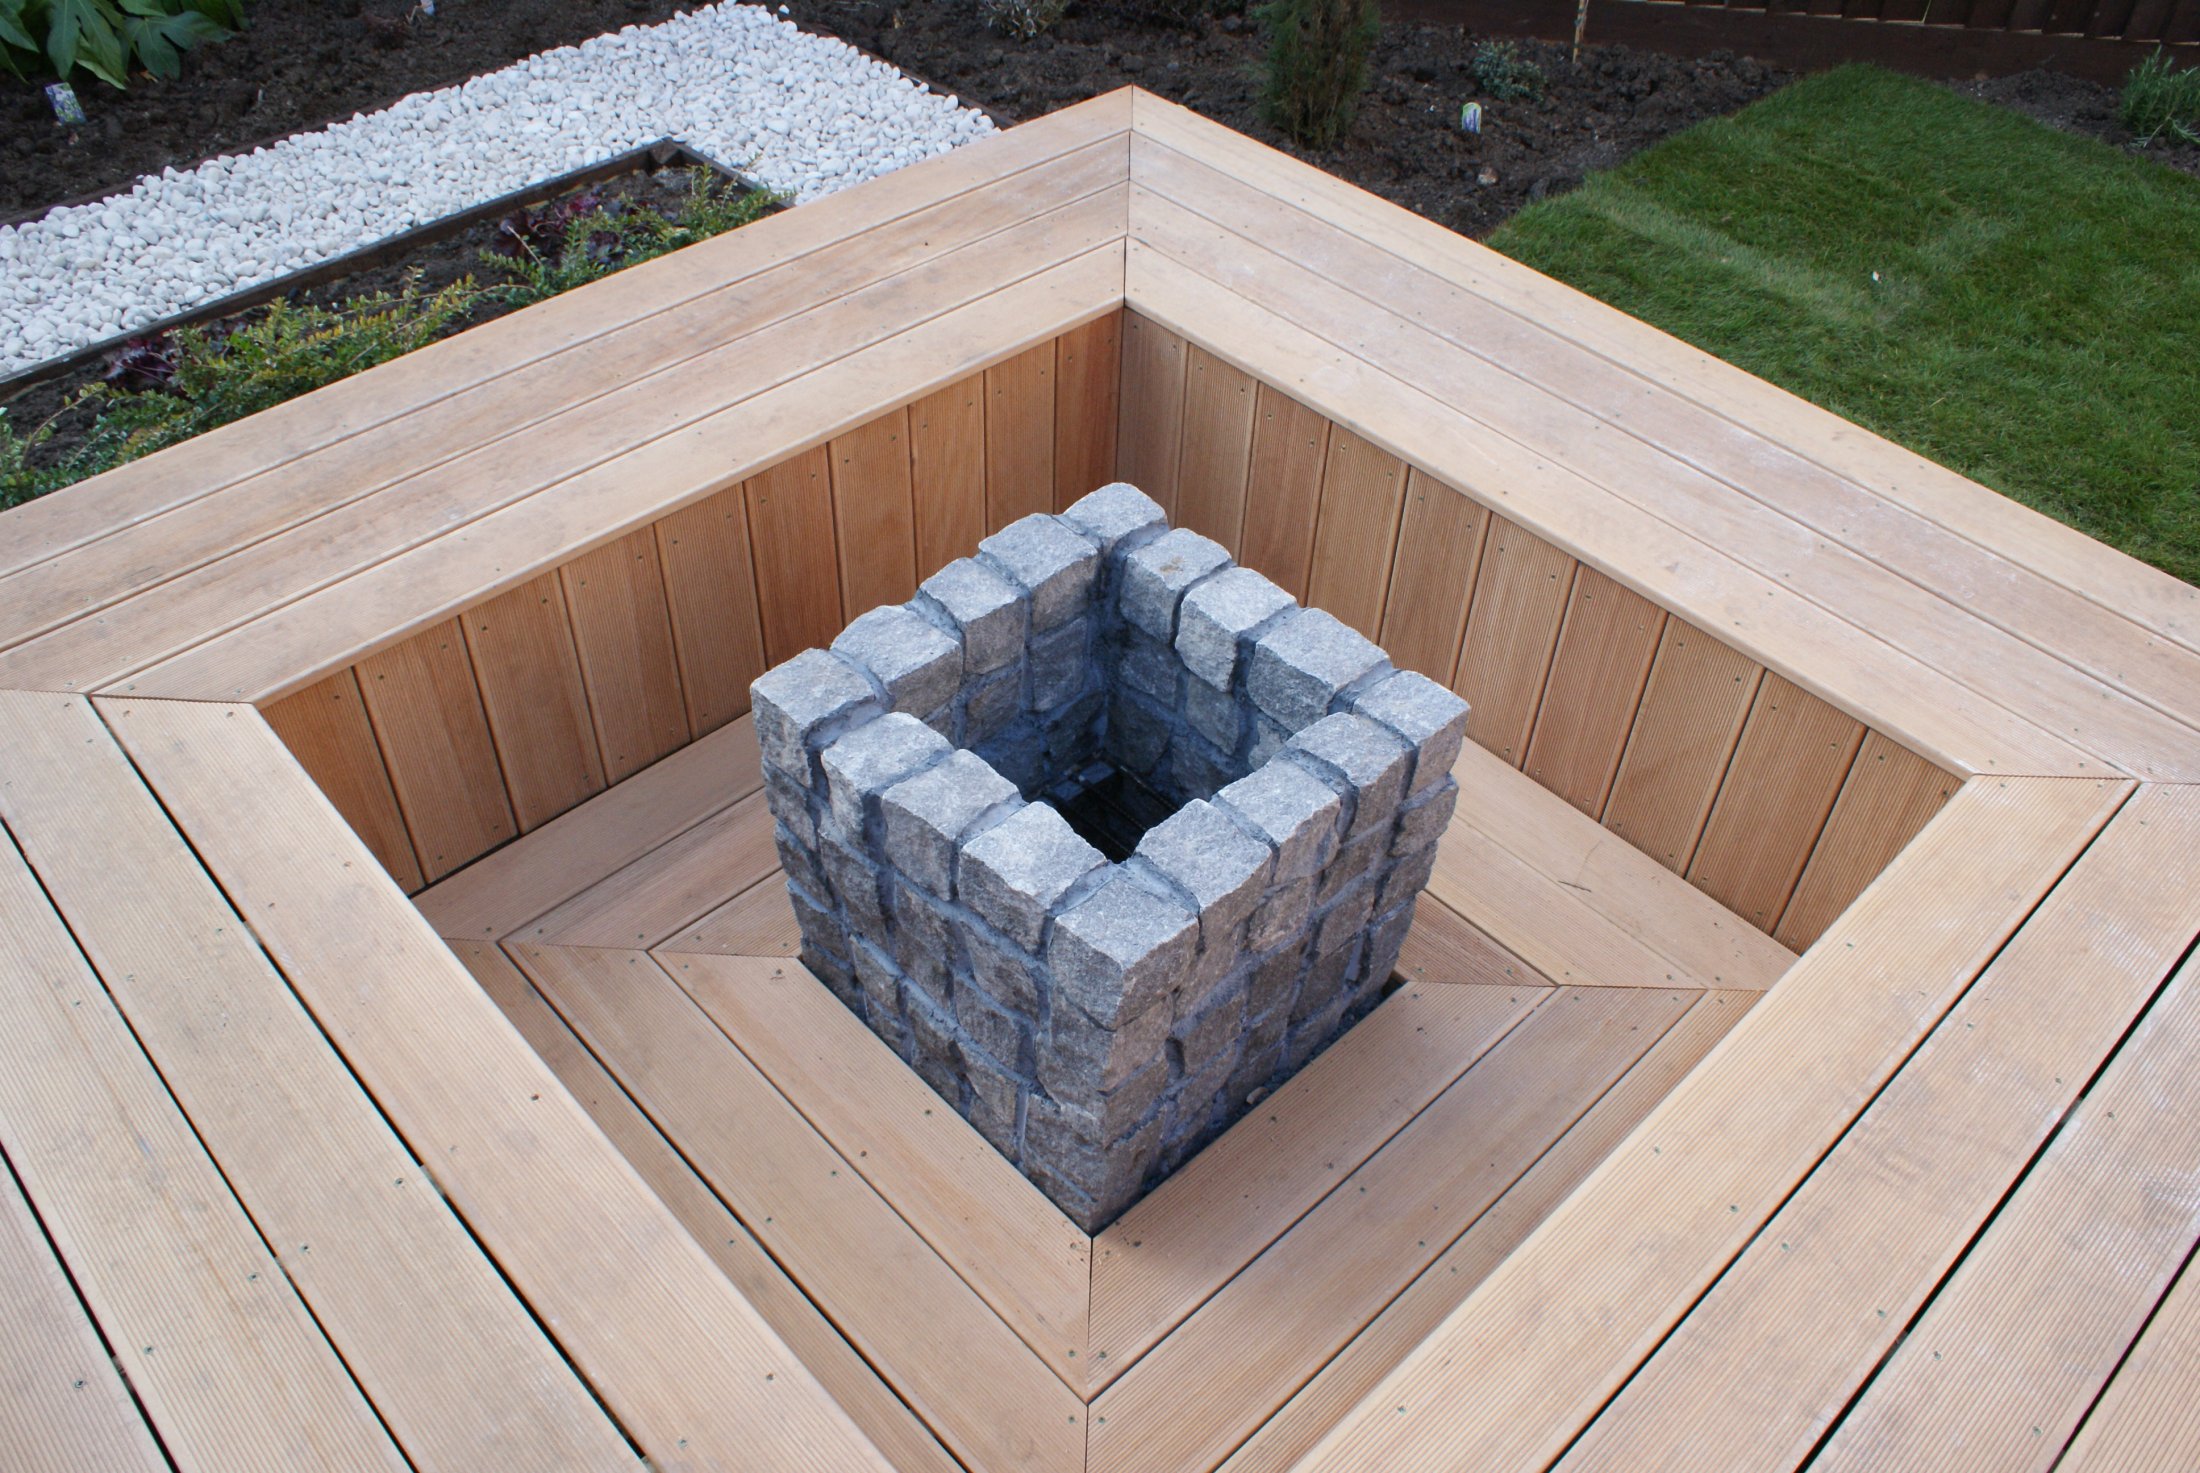 Fire pit and seating area design Stow cum quy, Cambridgeshire